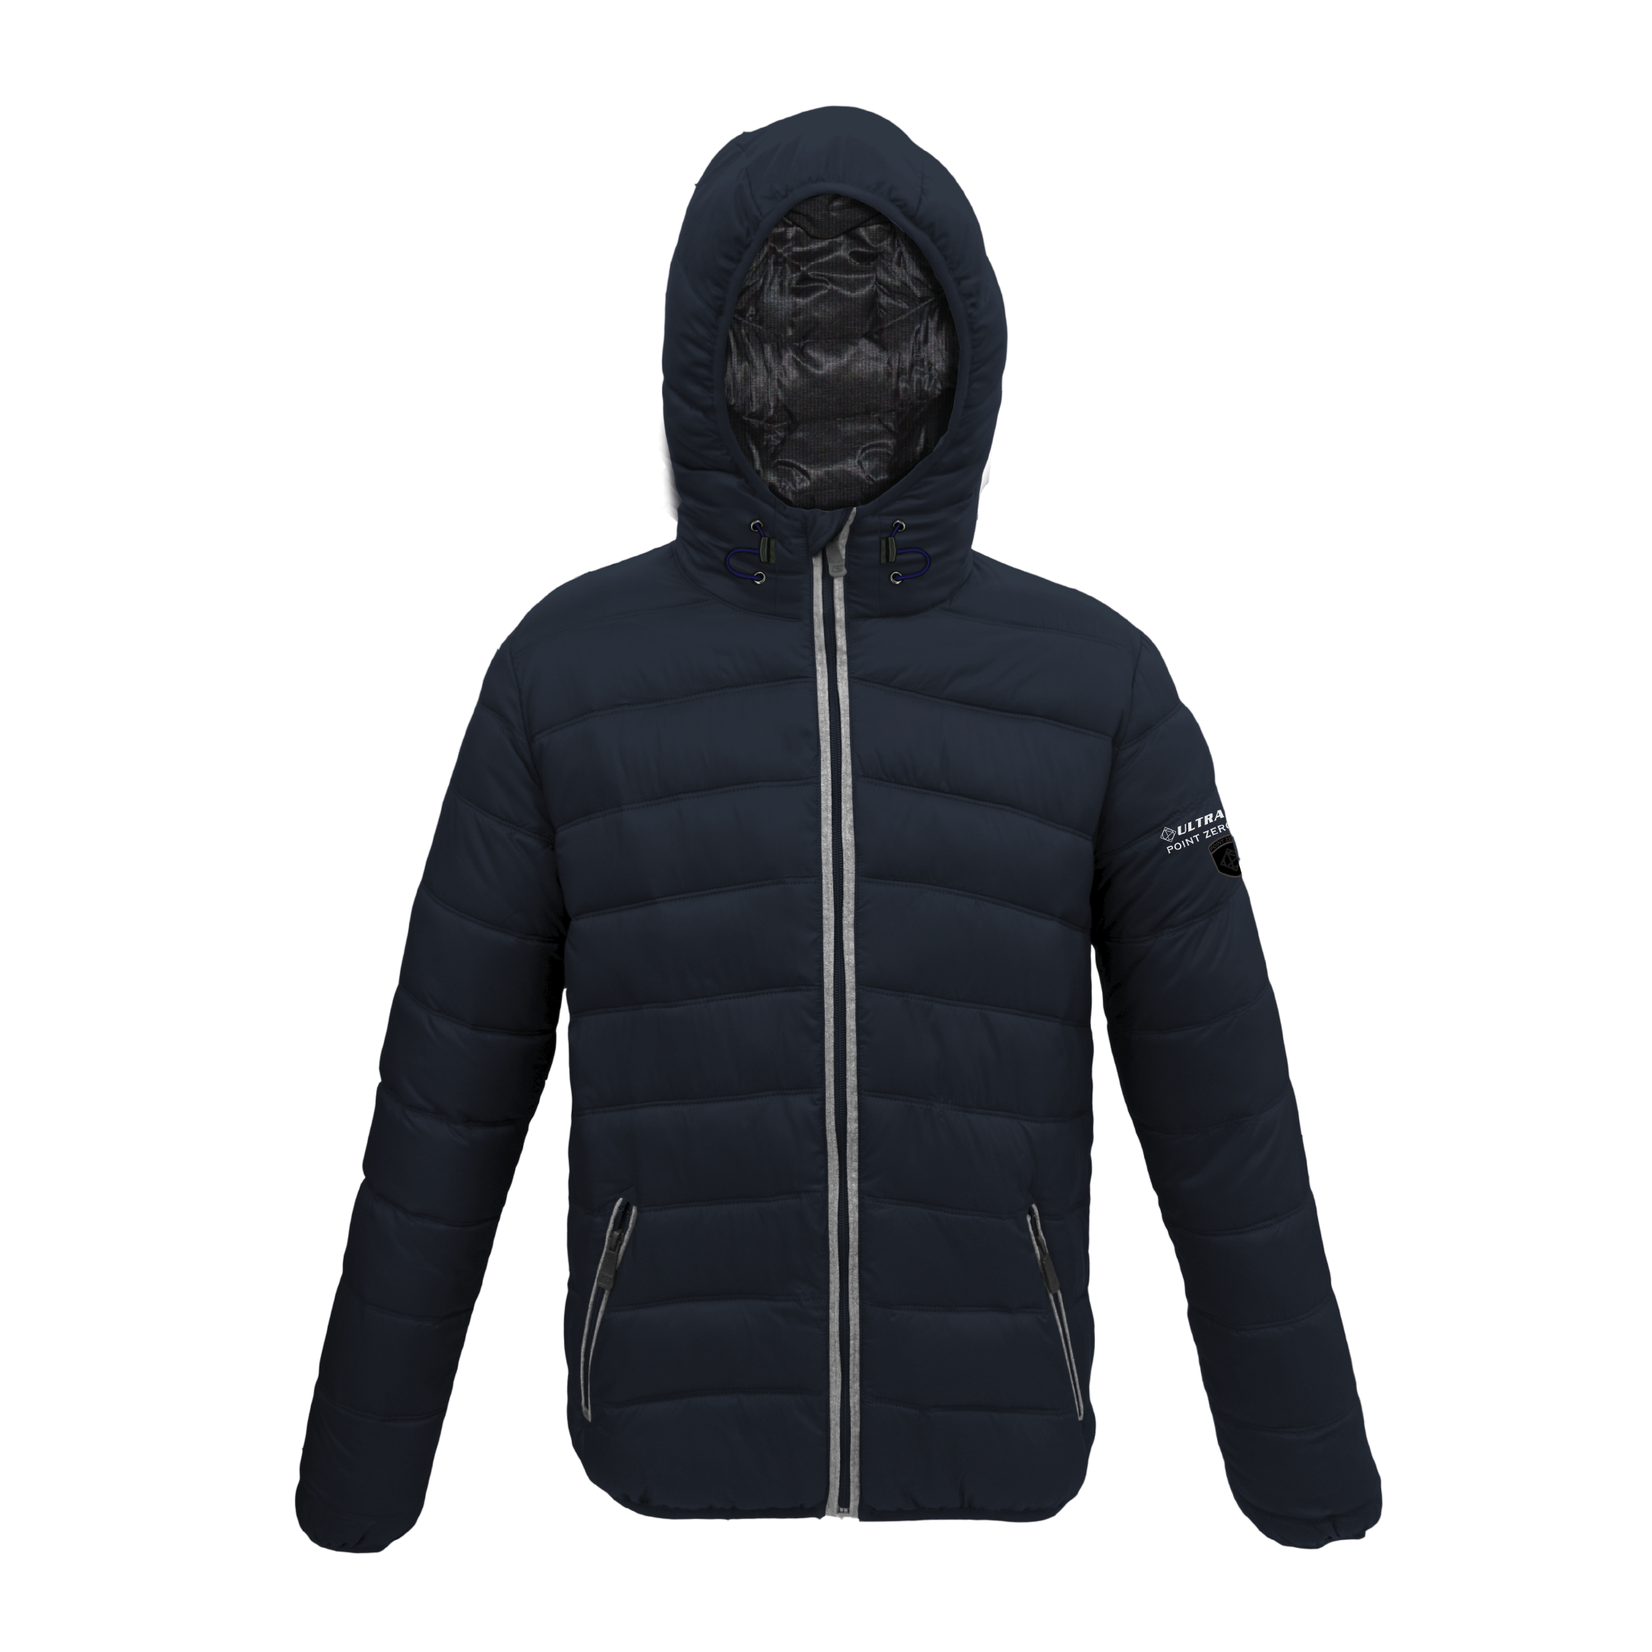 Point Zero Point Zero chervon quilt hooded "Ultralight" jacket available in 3 colors